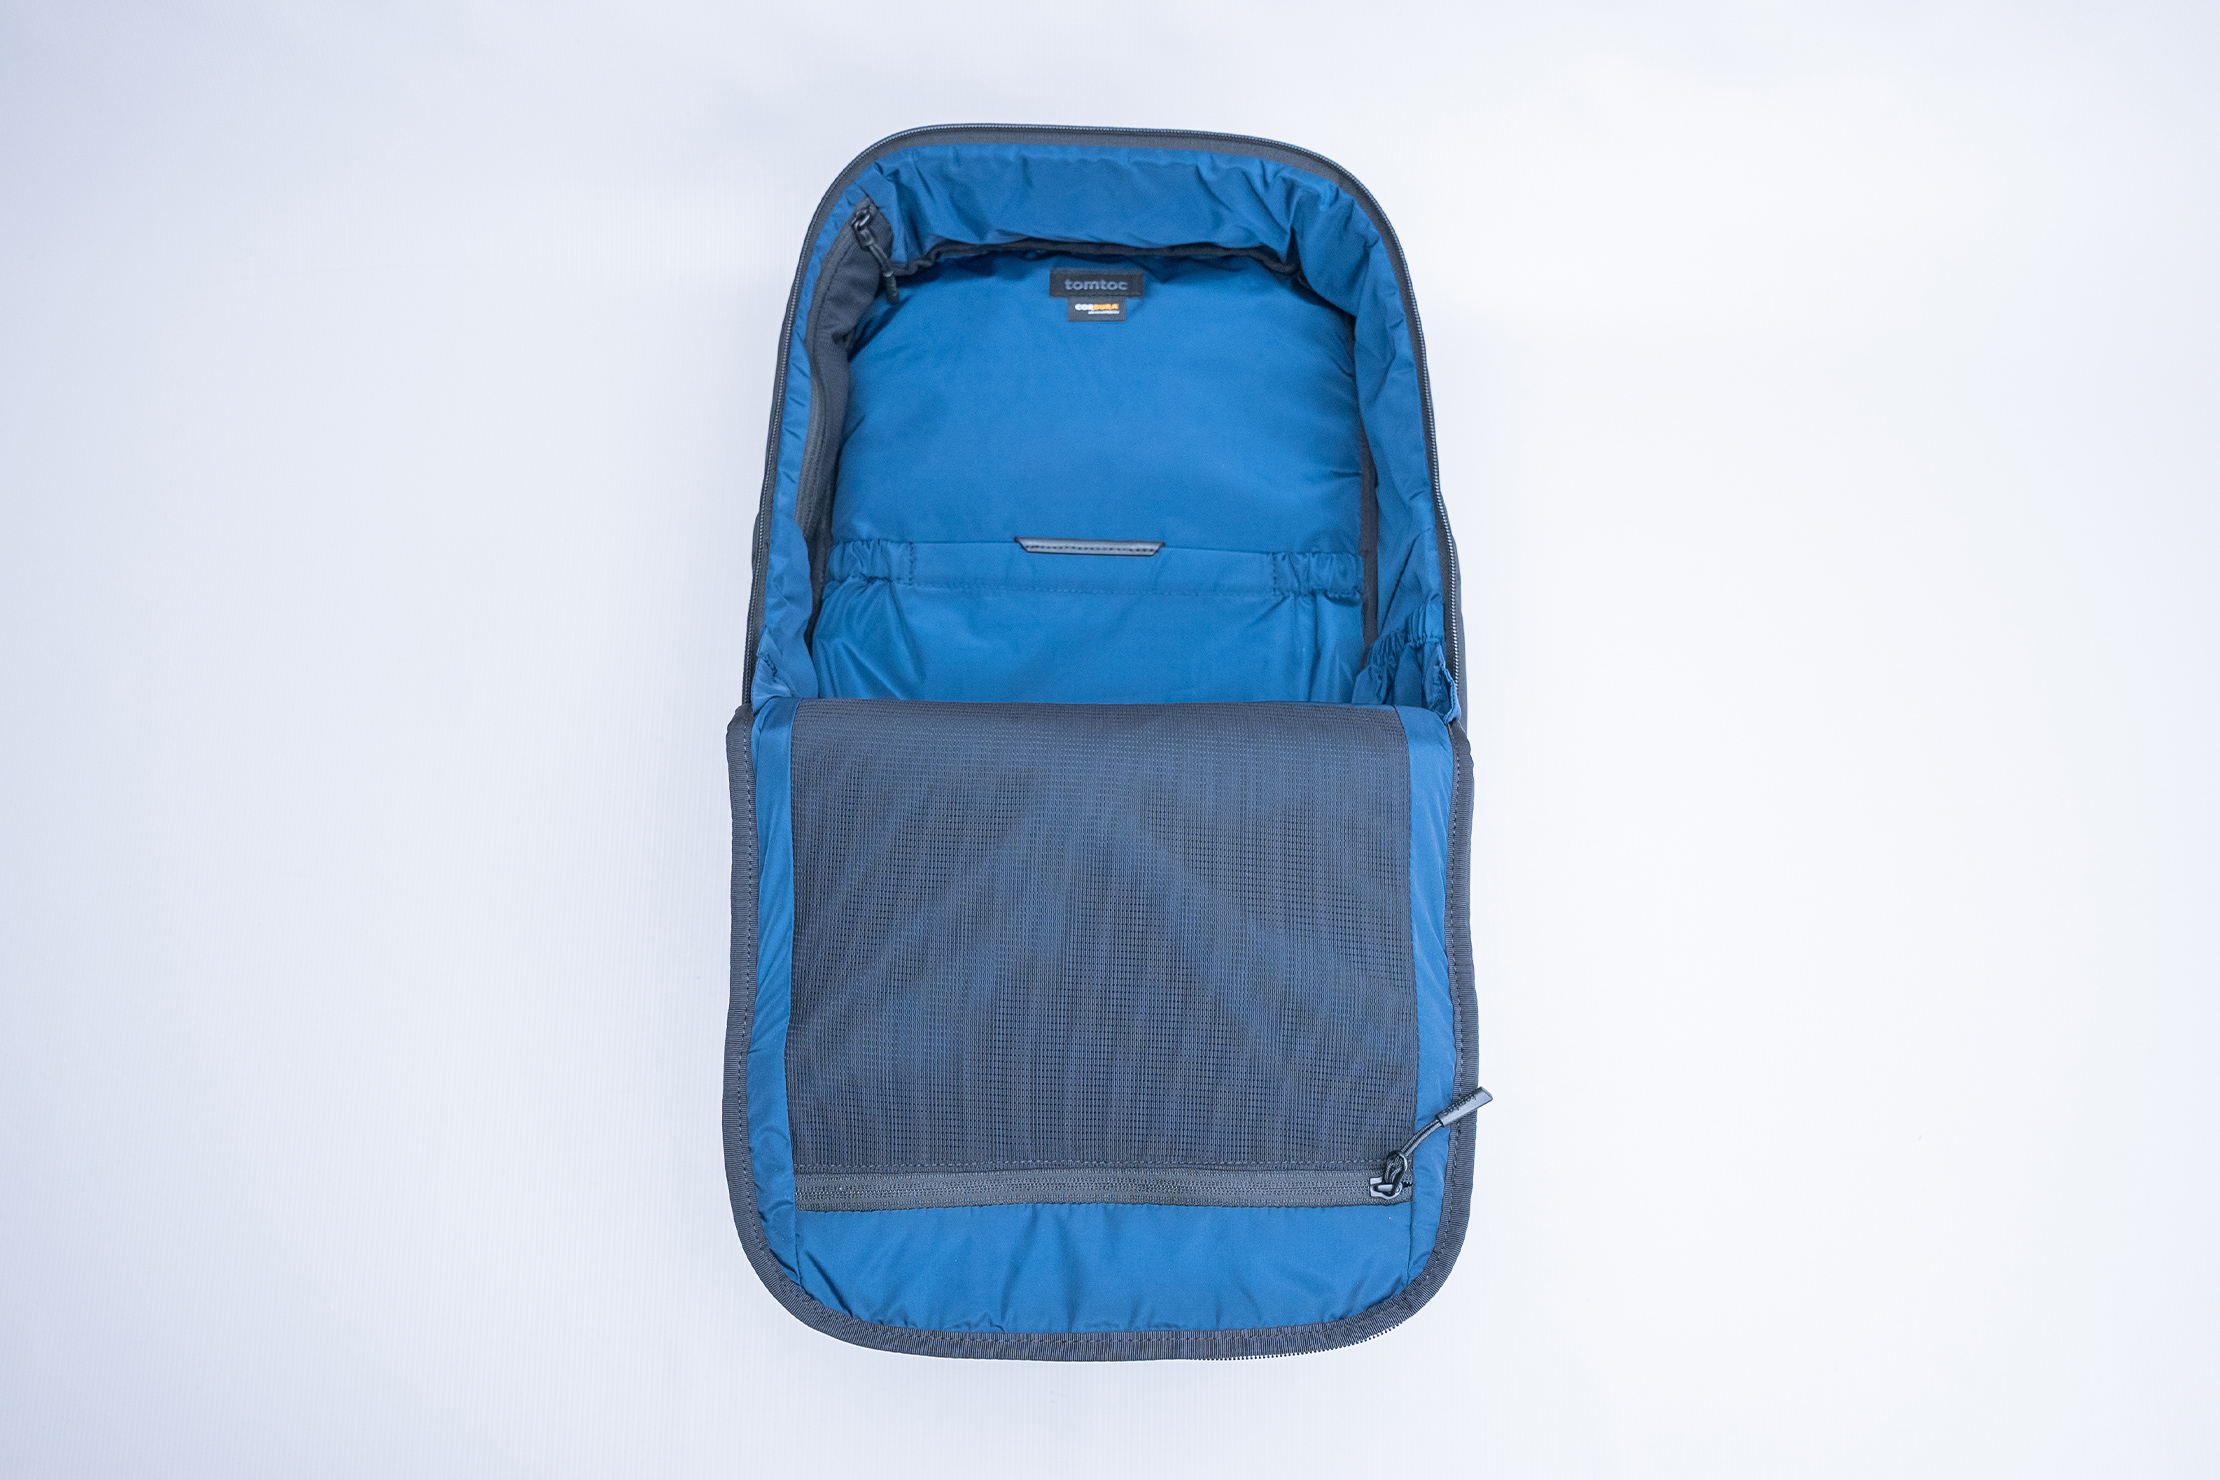 tomtoc Voyage-T50 Tech Backpack Interior